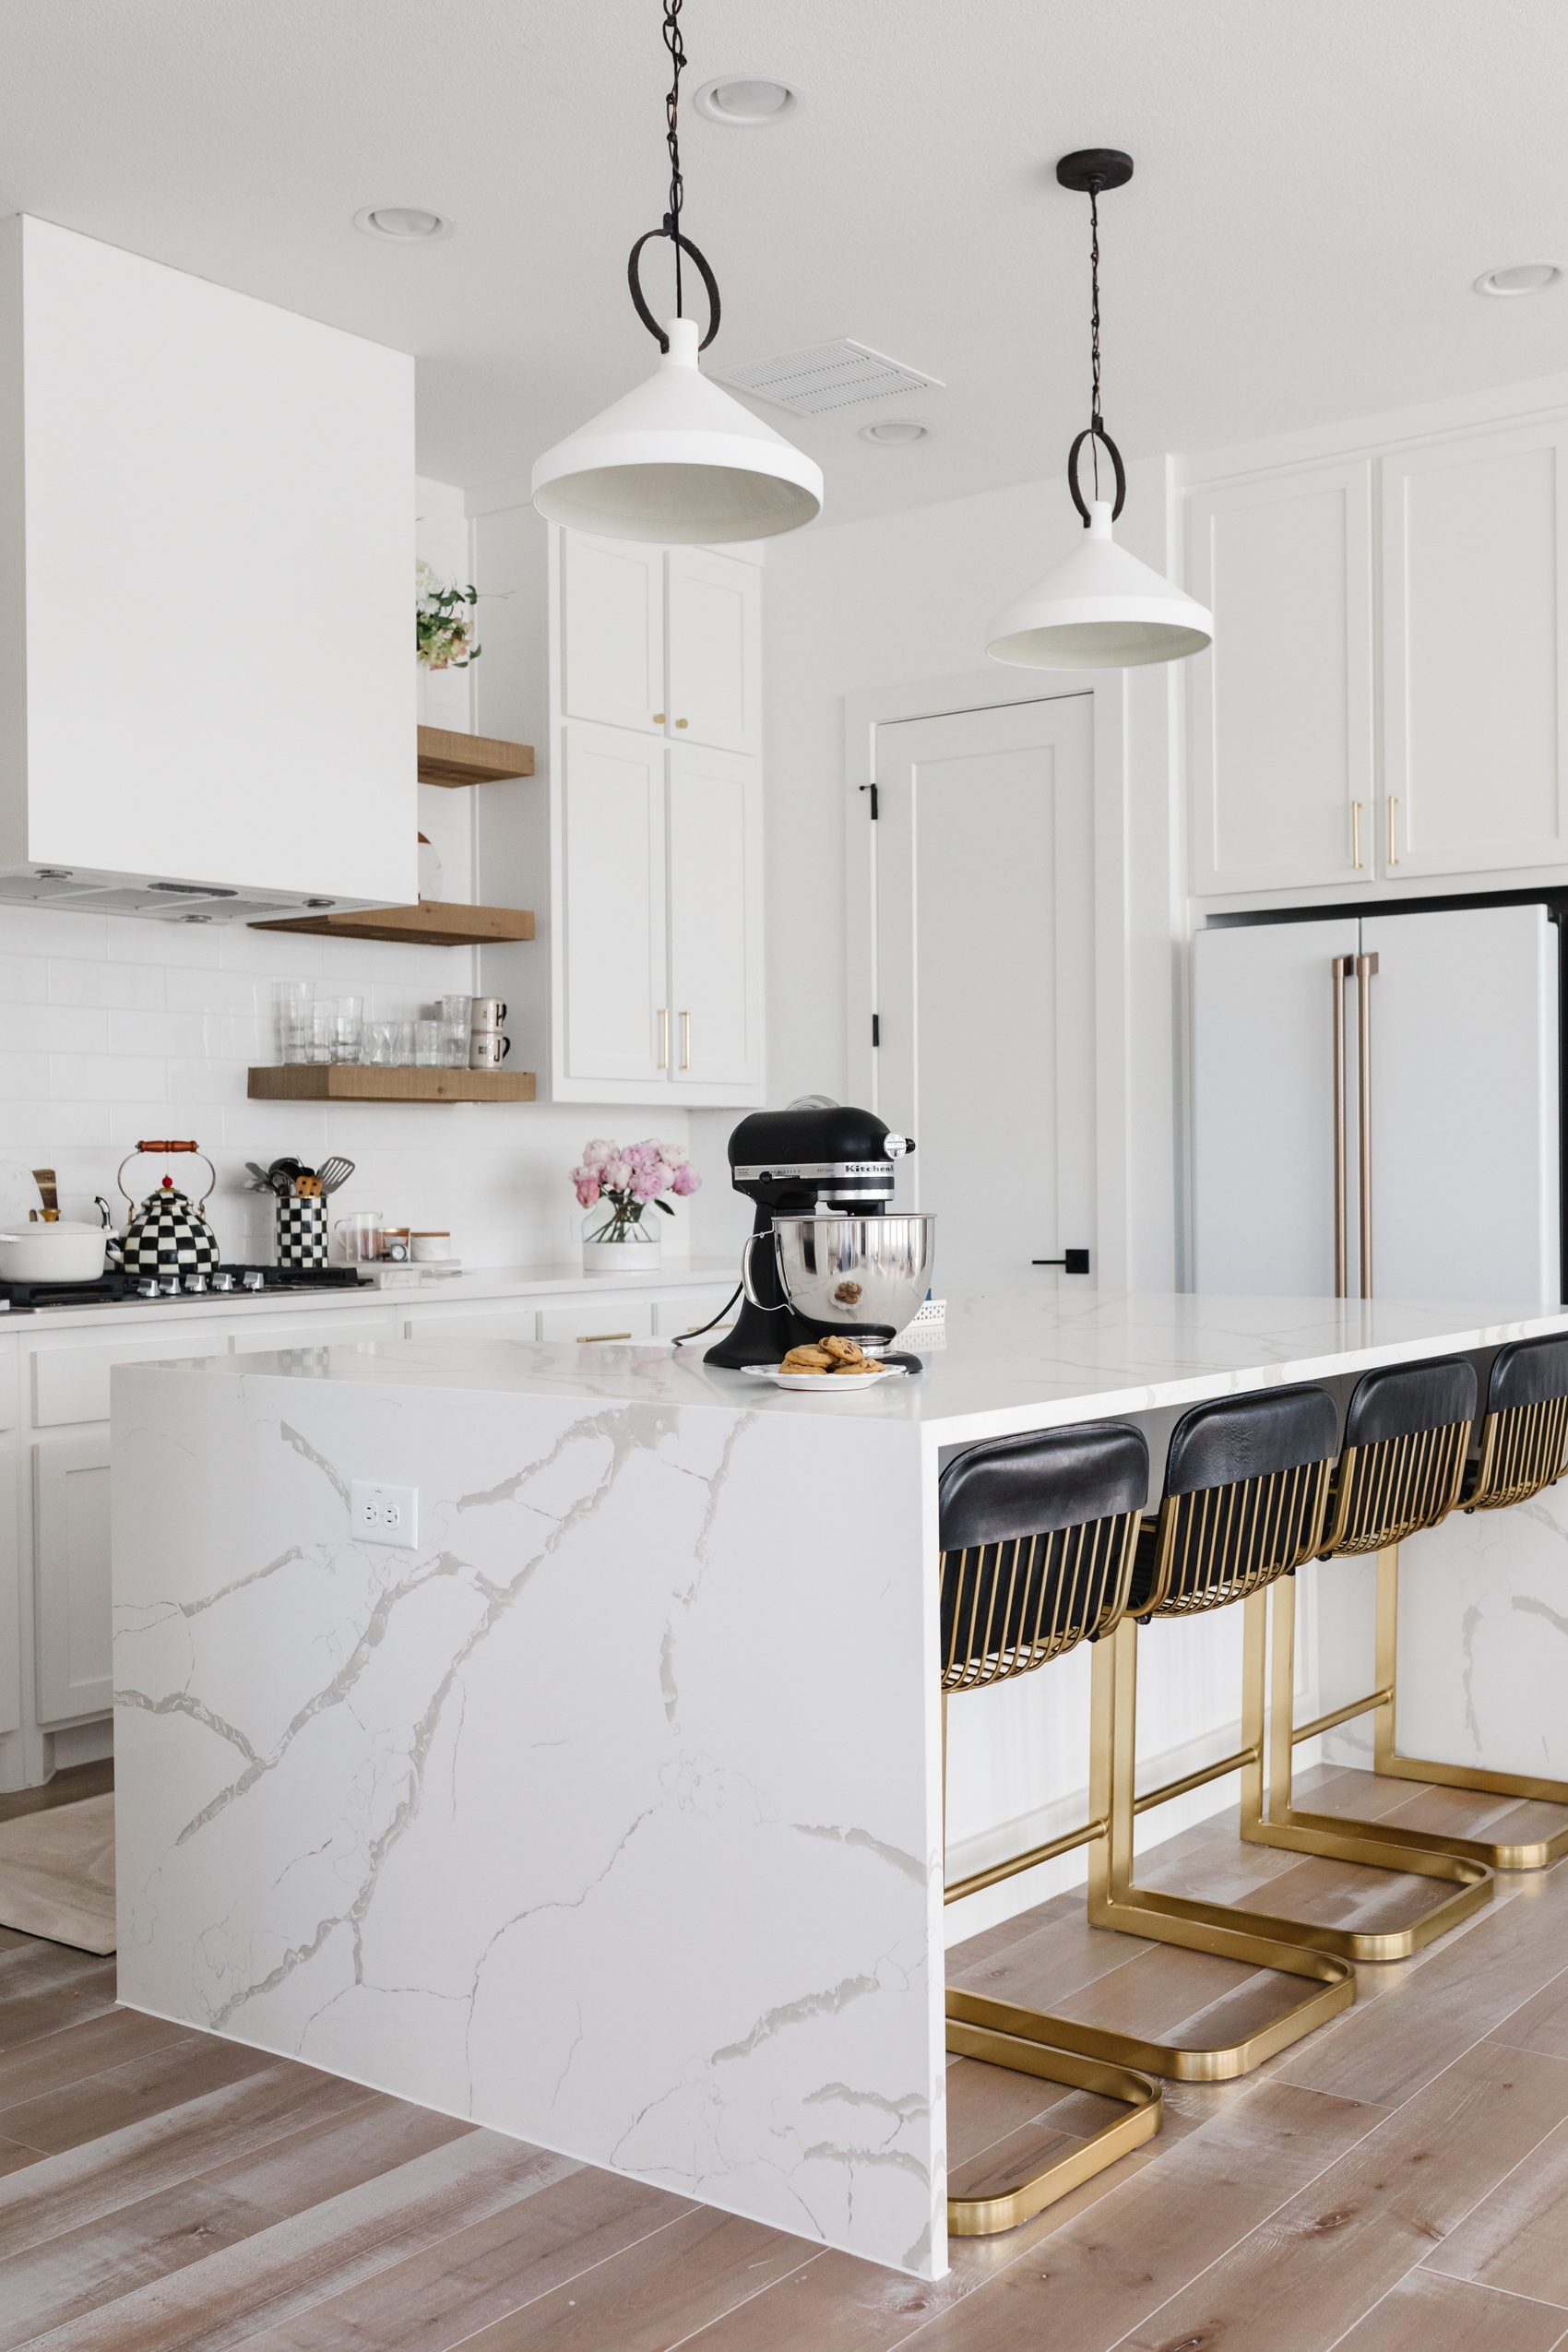 White kitchen with quartz calacatta foresta waterfall island, black CB2 Rake barstools, McGee & Co pendant lights, Cafe Appliances refrigerator, MacKenzie-Childs cookware and more